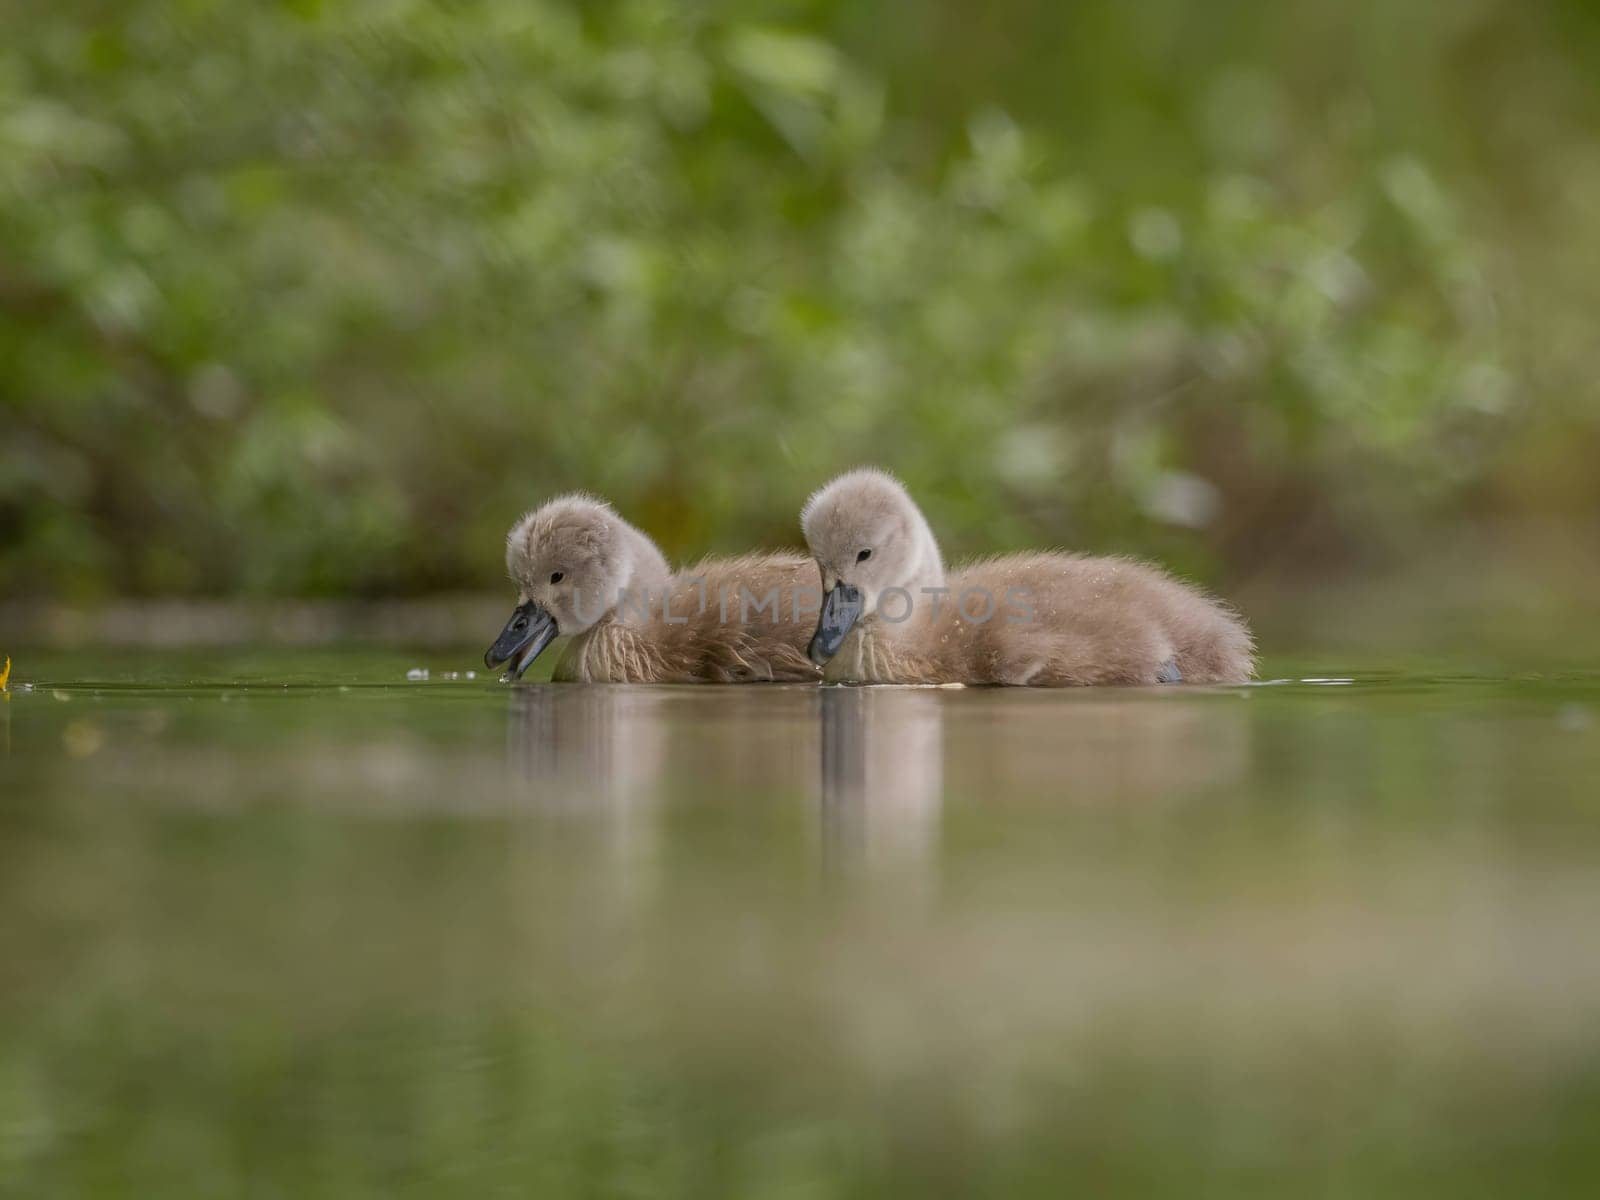 A close-up photograph captures young mute swans gracefully floating on the water amidst the soothing green scenery, portraying the serenity of nature.